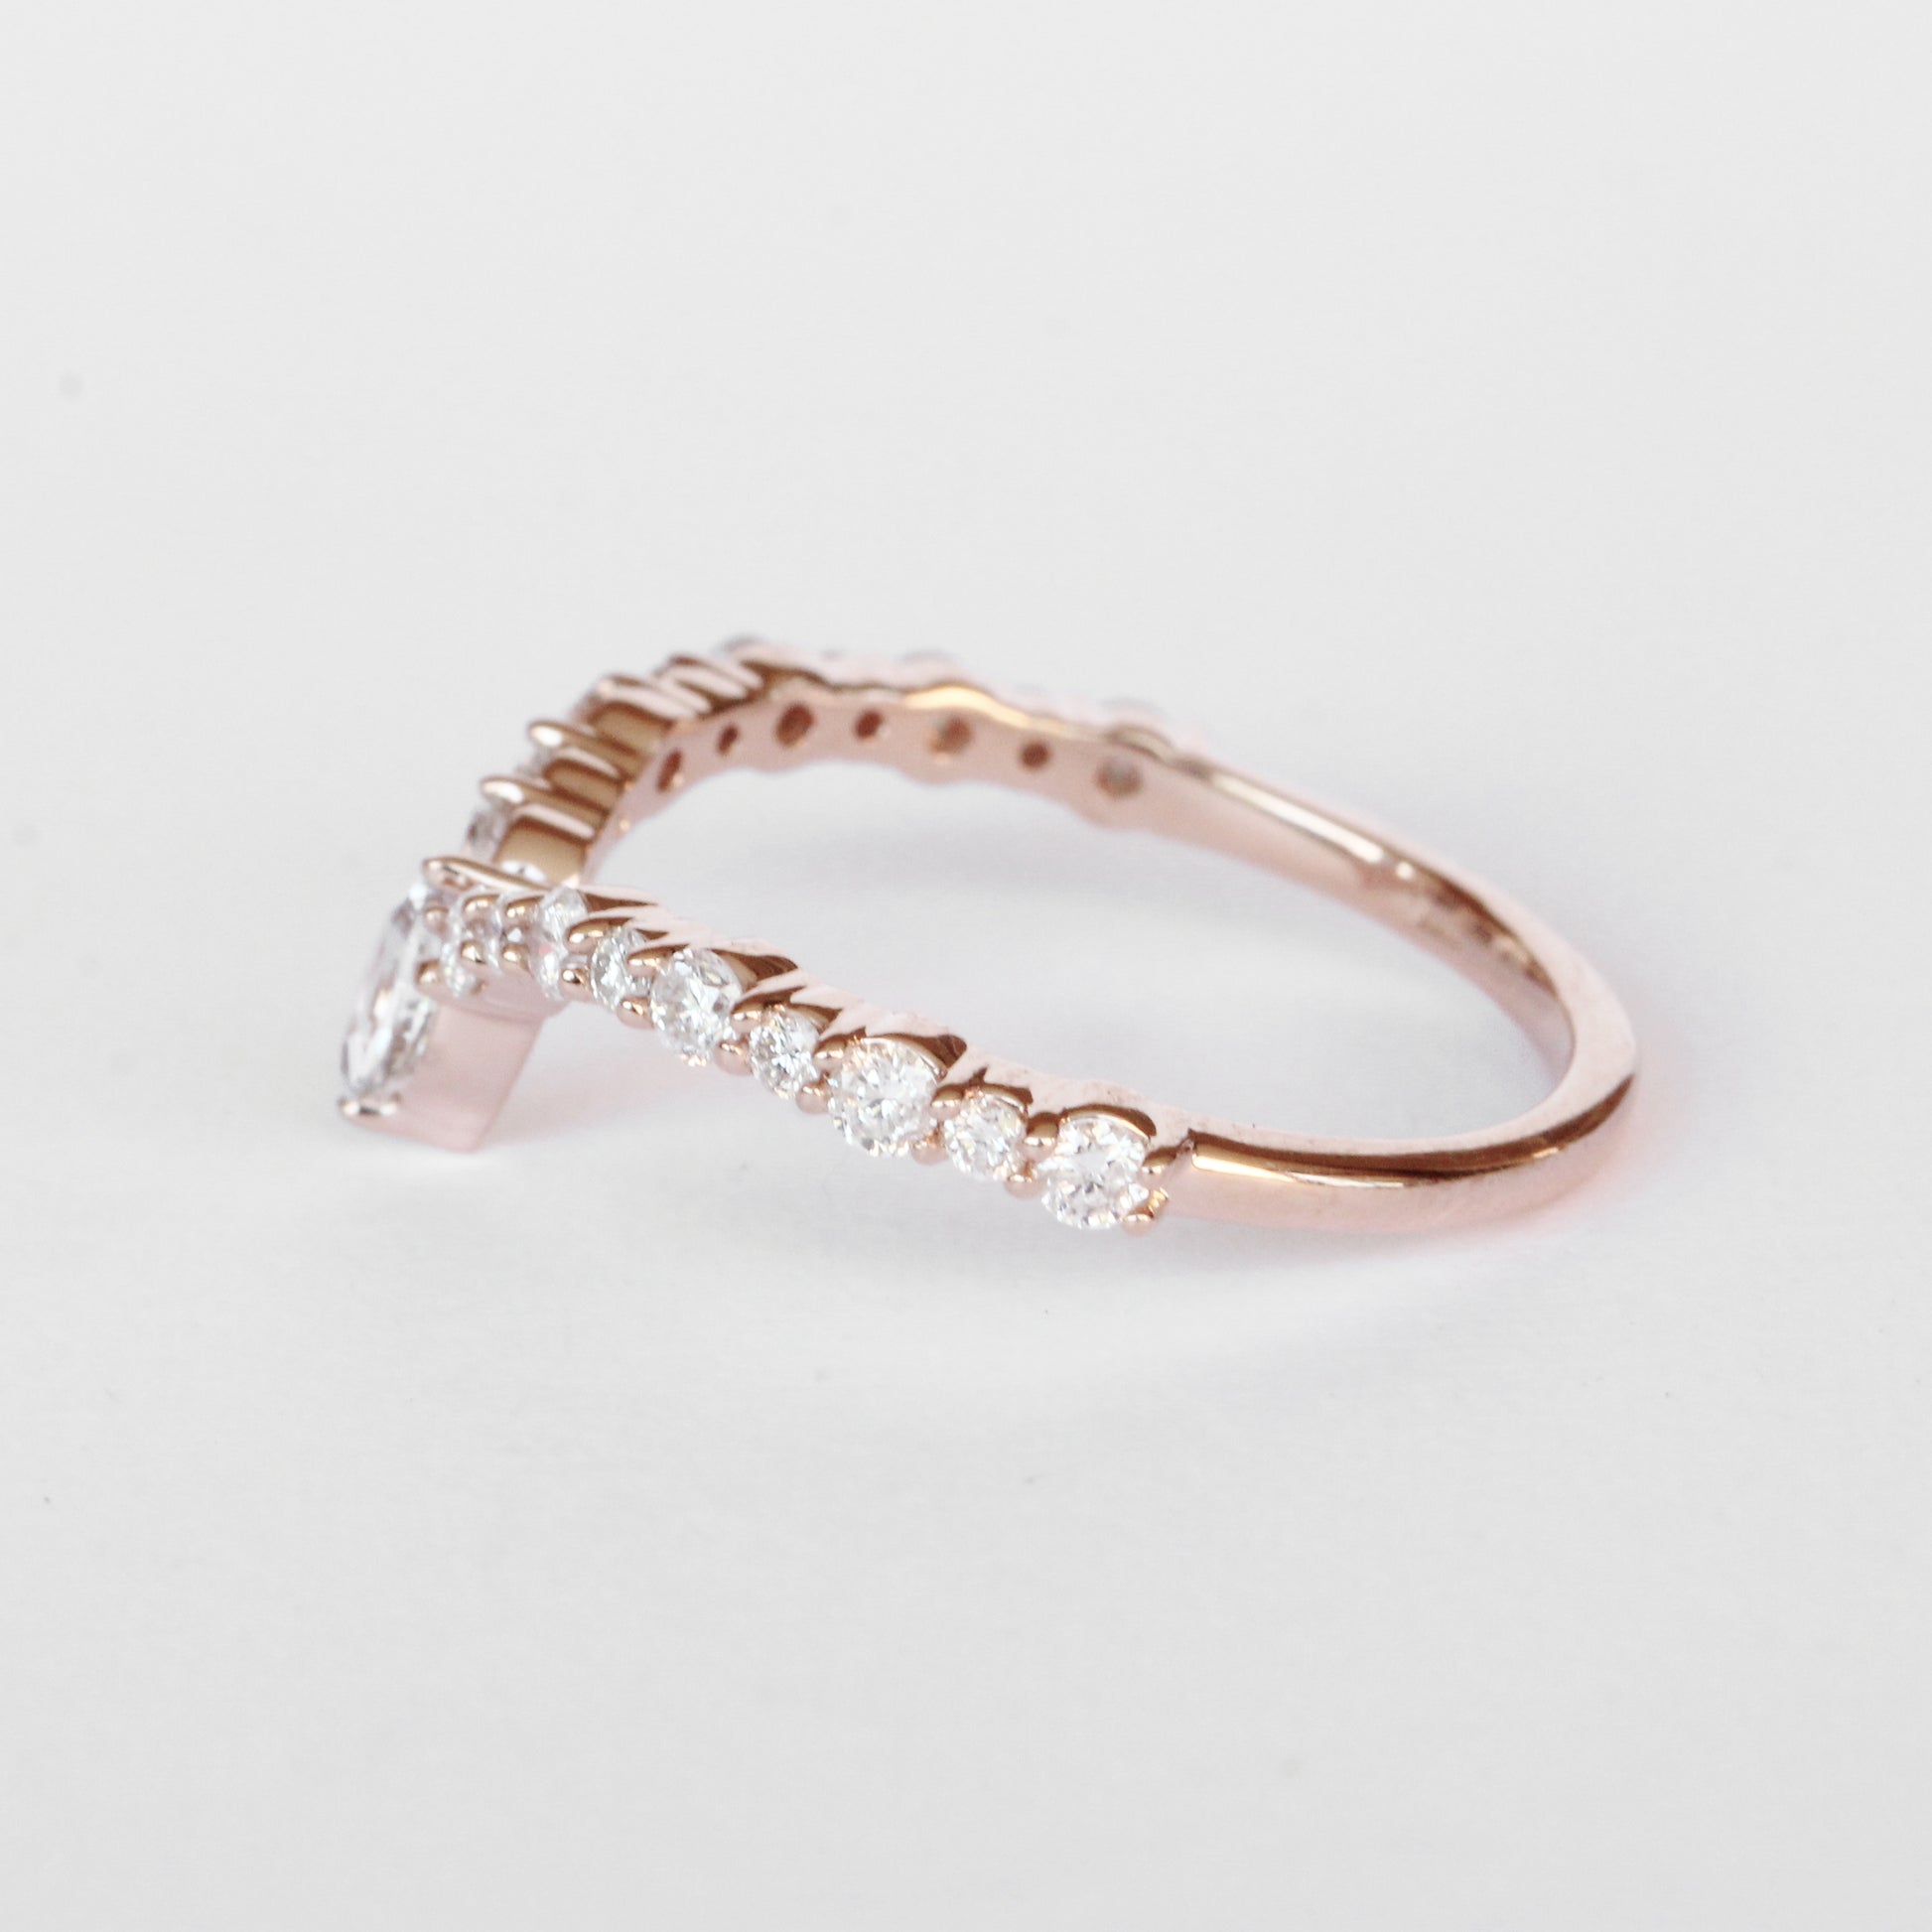 Aspen V-Contoured Stackable Wedding Band - Made to Order - Midwinter Co. Alternative Bridal Rings and Modern Fine Jewelry